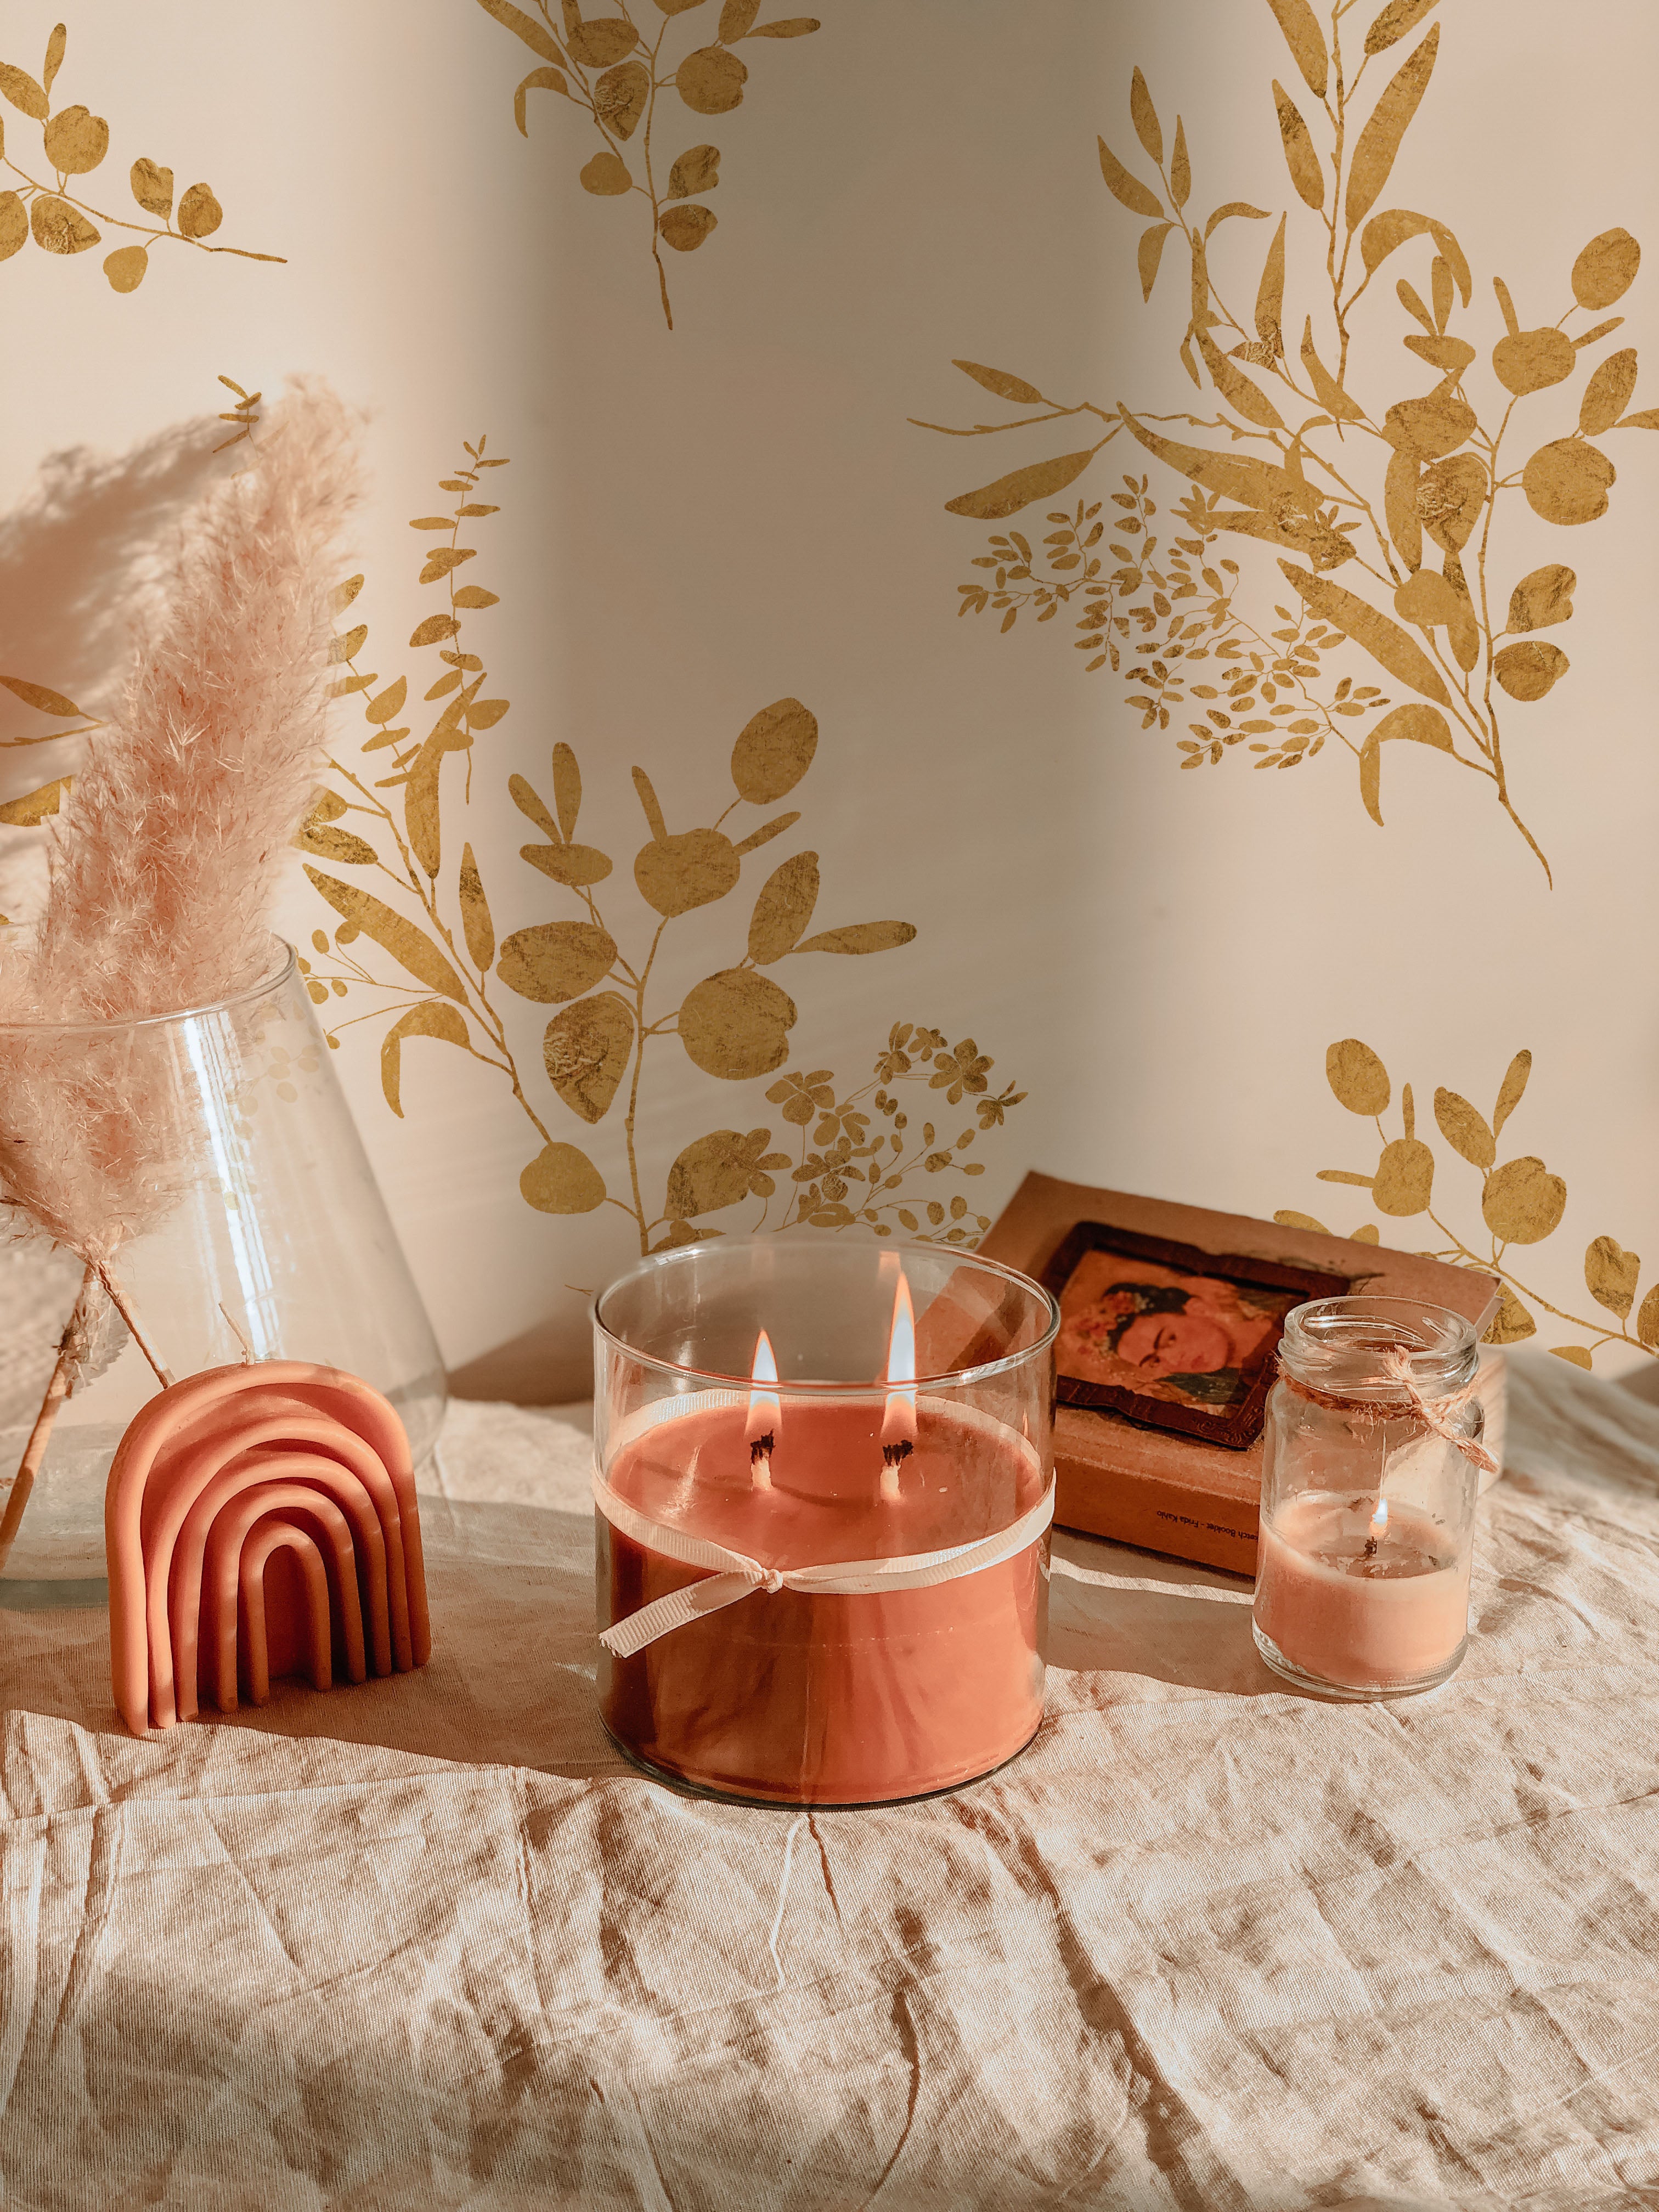 A cozy room setting featuring Golden Greenery Wallpaper with golden botanical patterns on a light beige background, creating a warm and inviting ambiance. The wallpaper accentuates a decor of a large, multi-wick scented candle, a terracotta rainbow-shaped decor item, and vintage books.